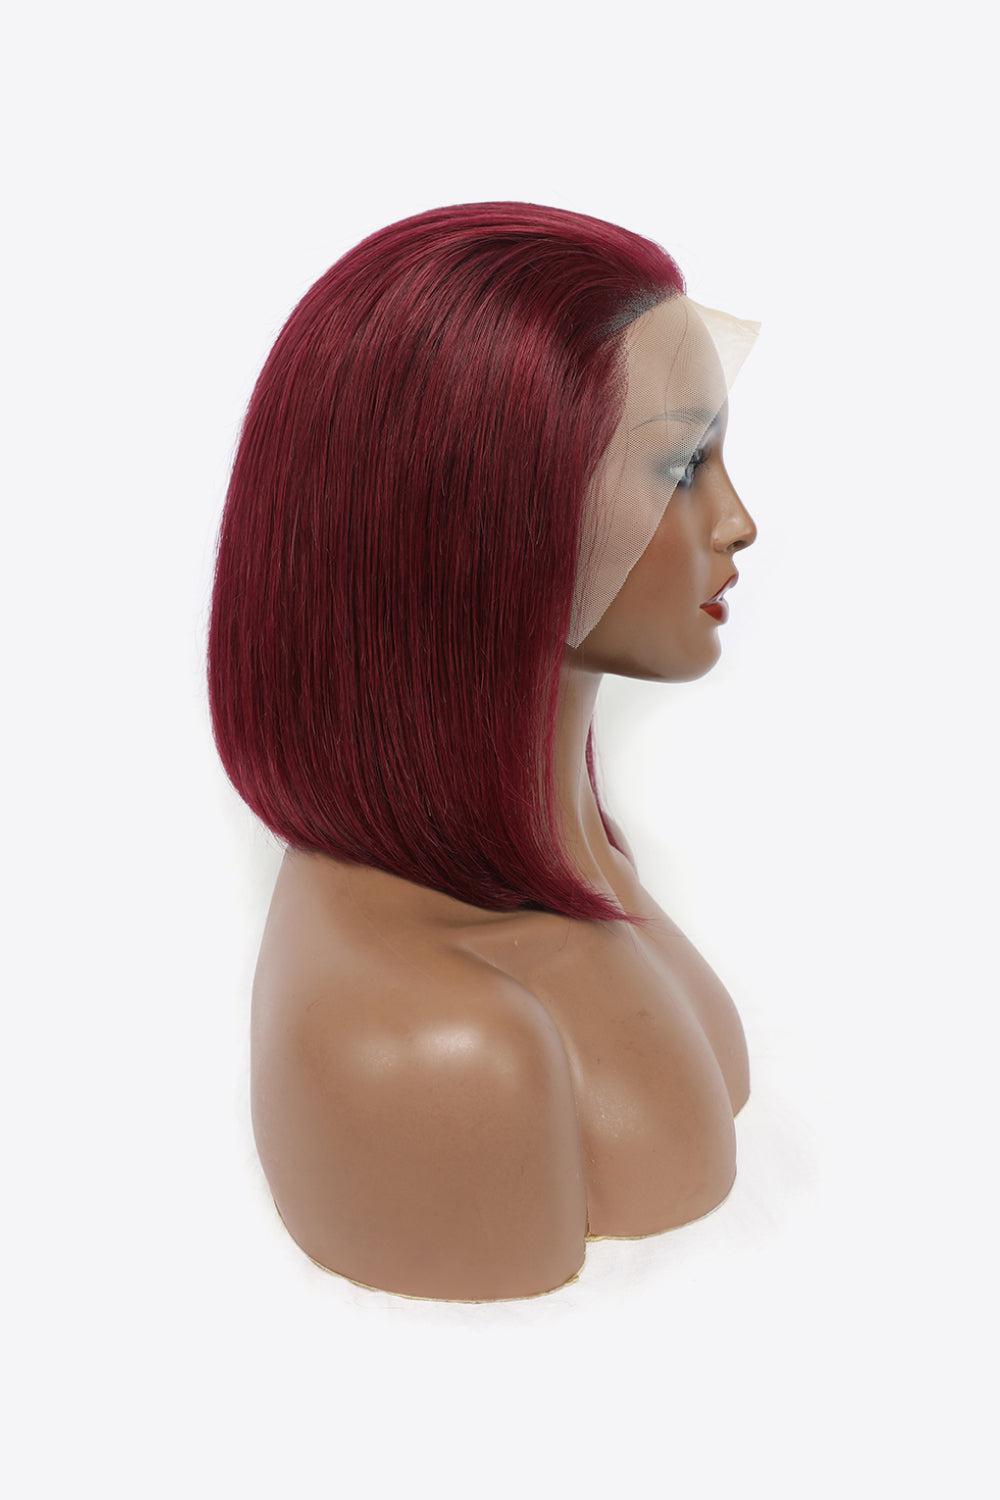 a wig with red hair on a mannequin head